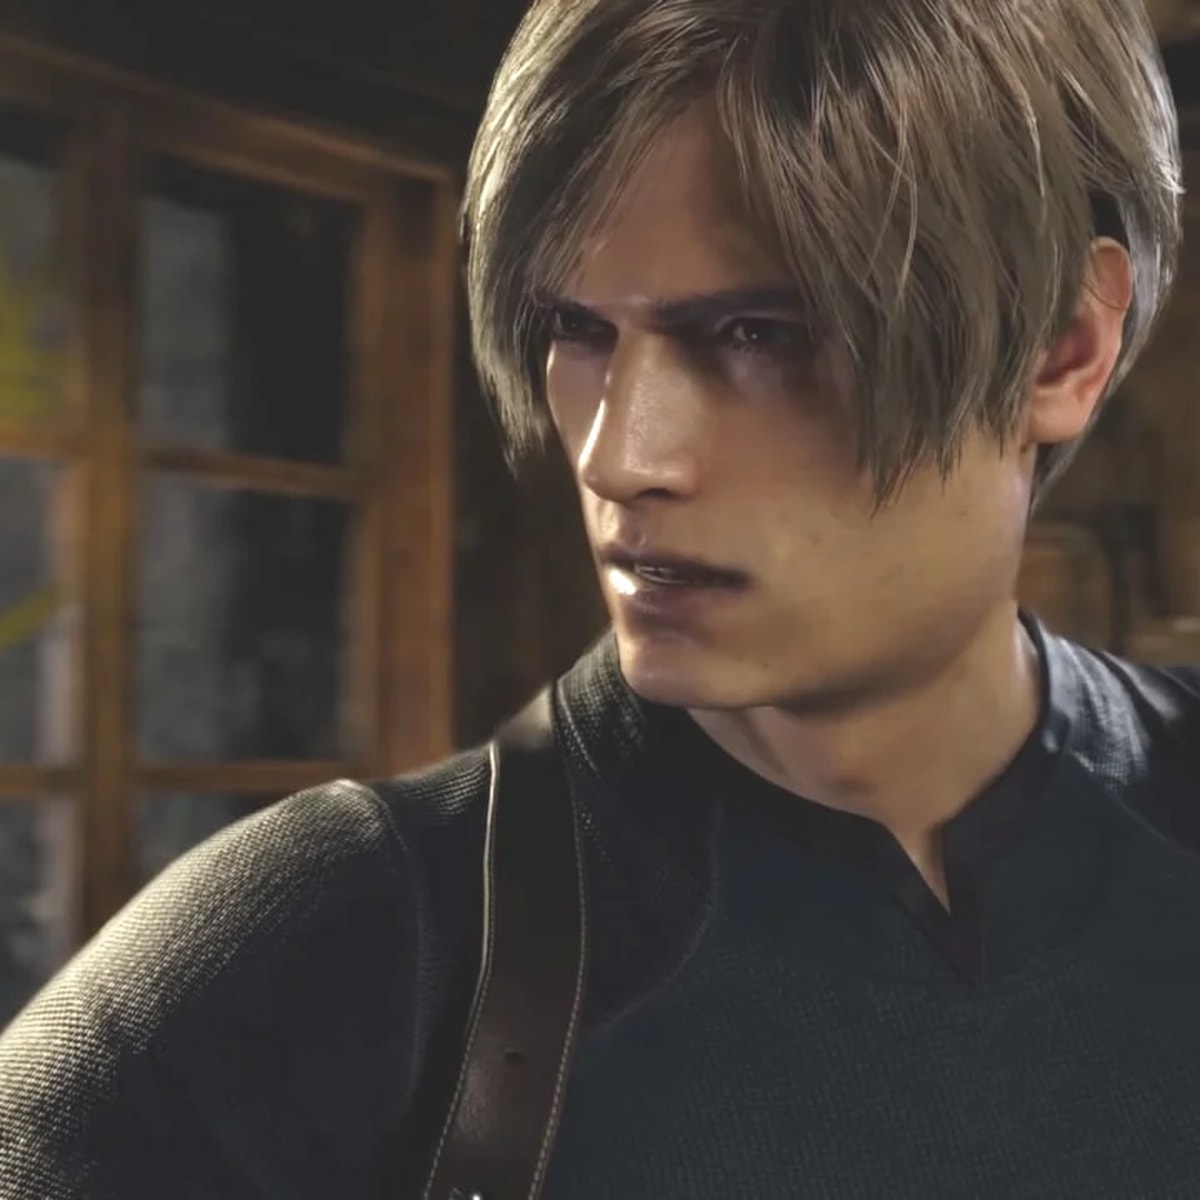 Resident Evil 4 Remake Rated Mature For Gory Content